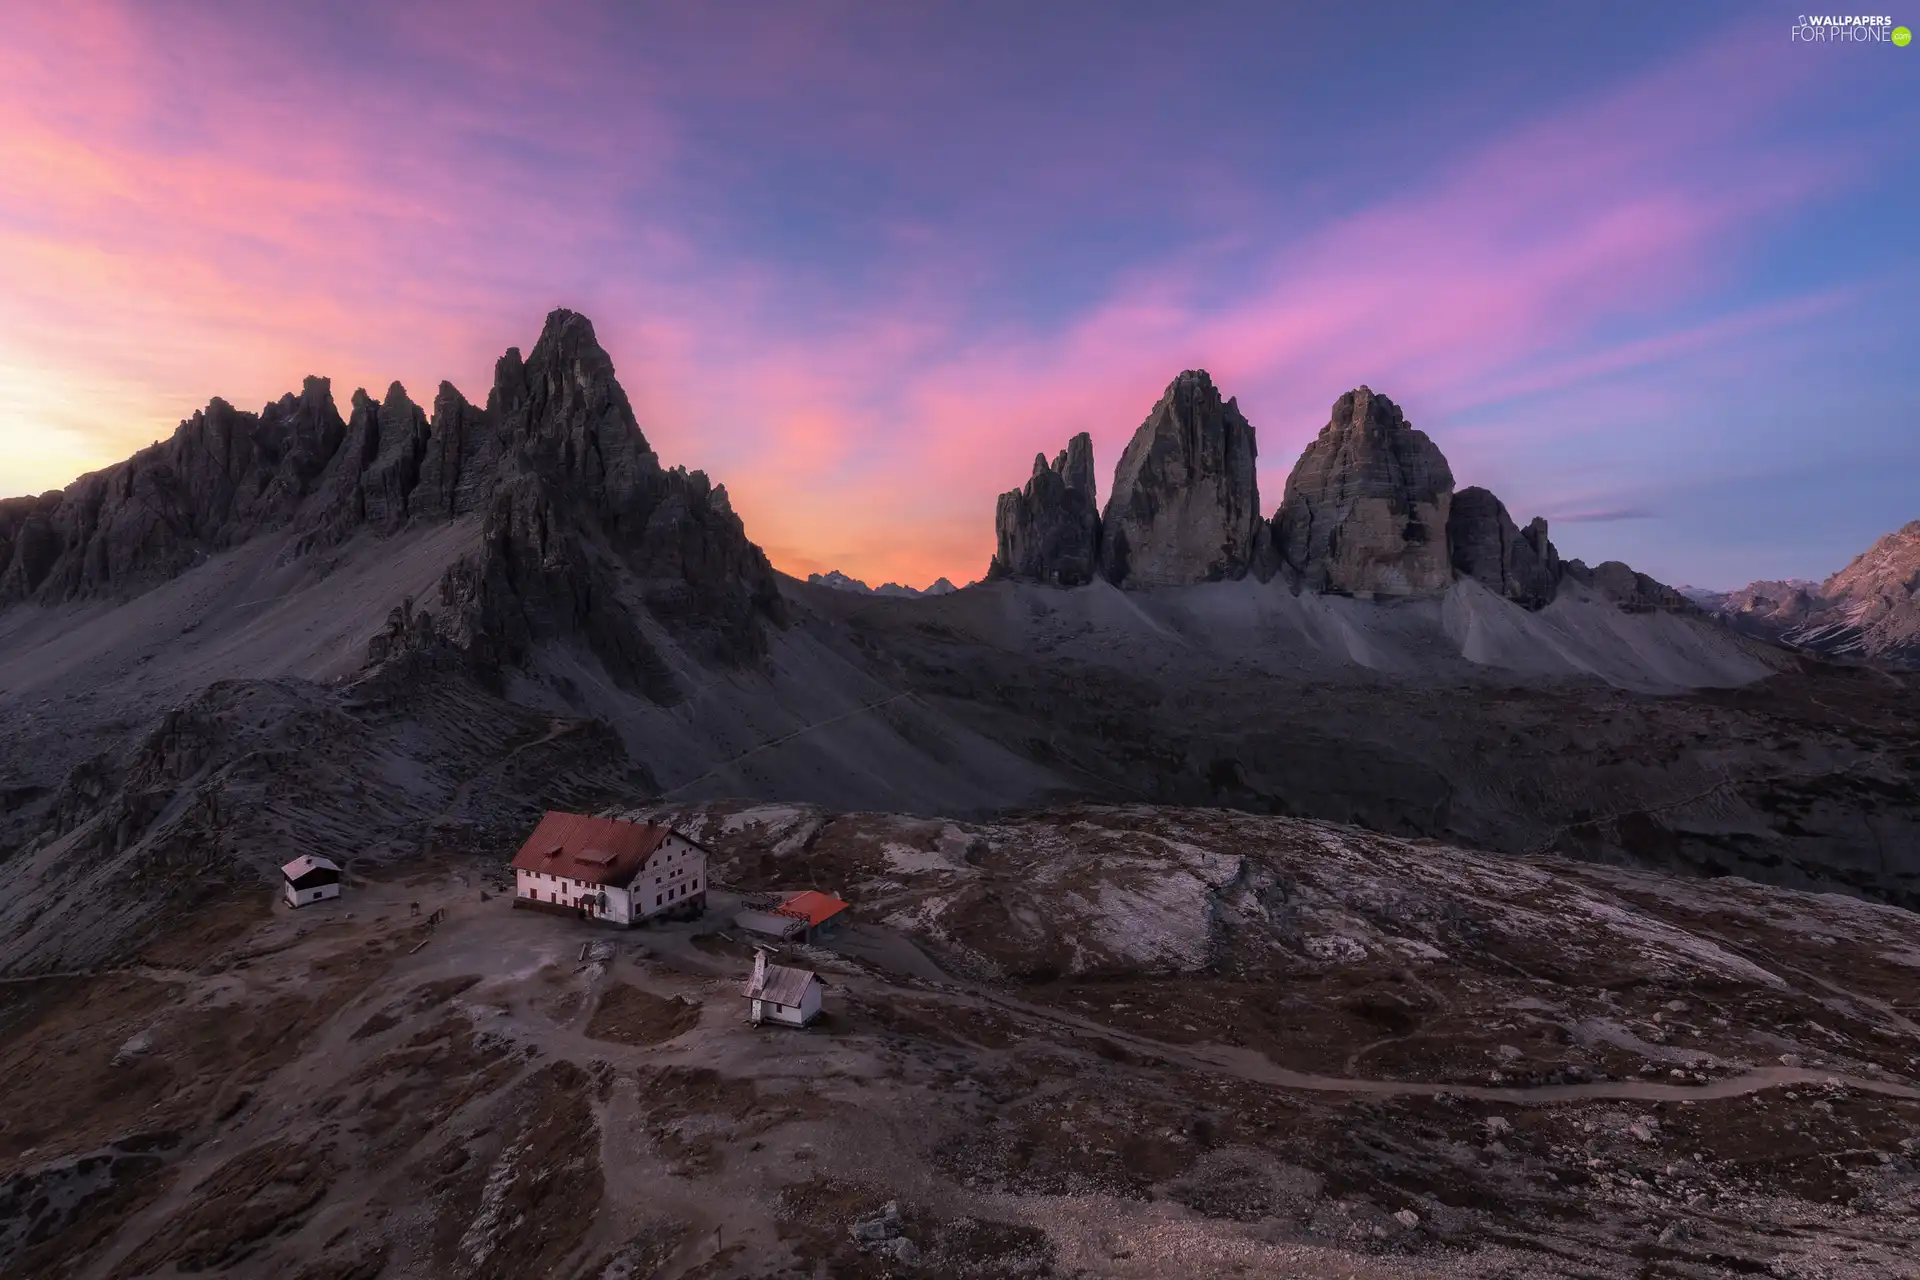 Valley, Tre Cime di Lavaredo, Province of Belluno, Houses, Dolomites Mountains, Great Sunsets, Italy